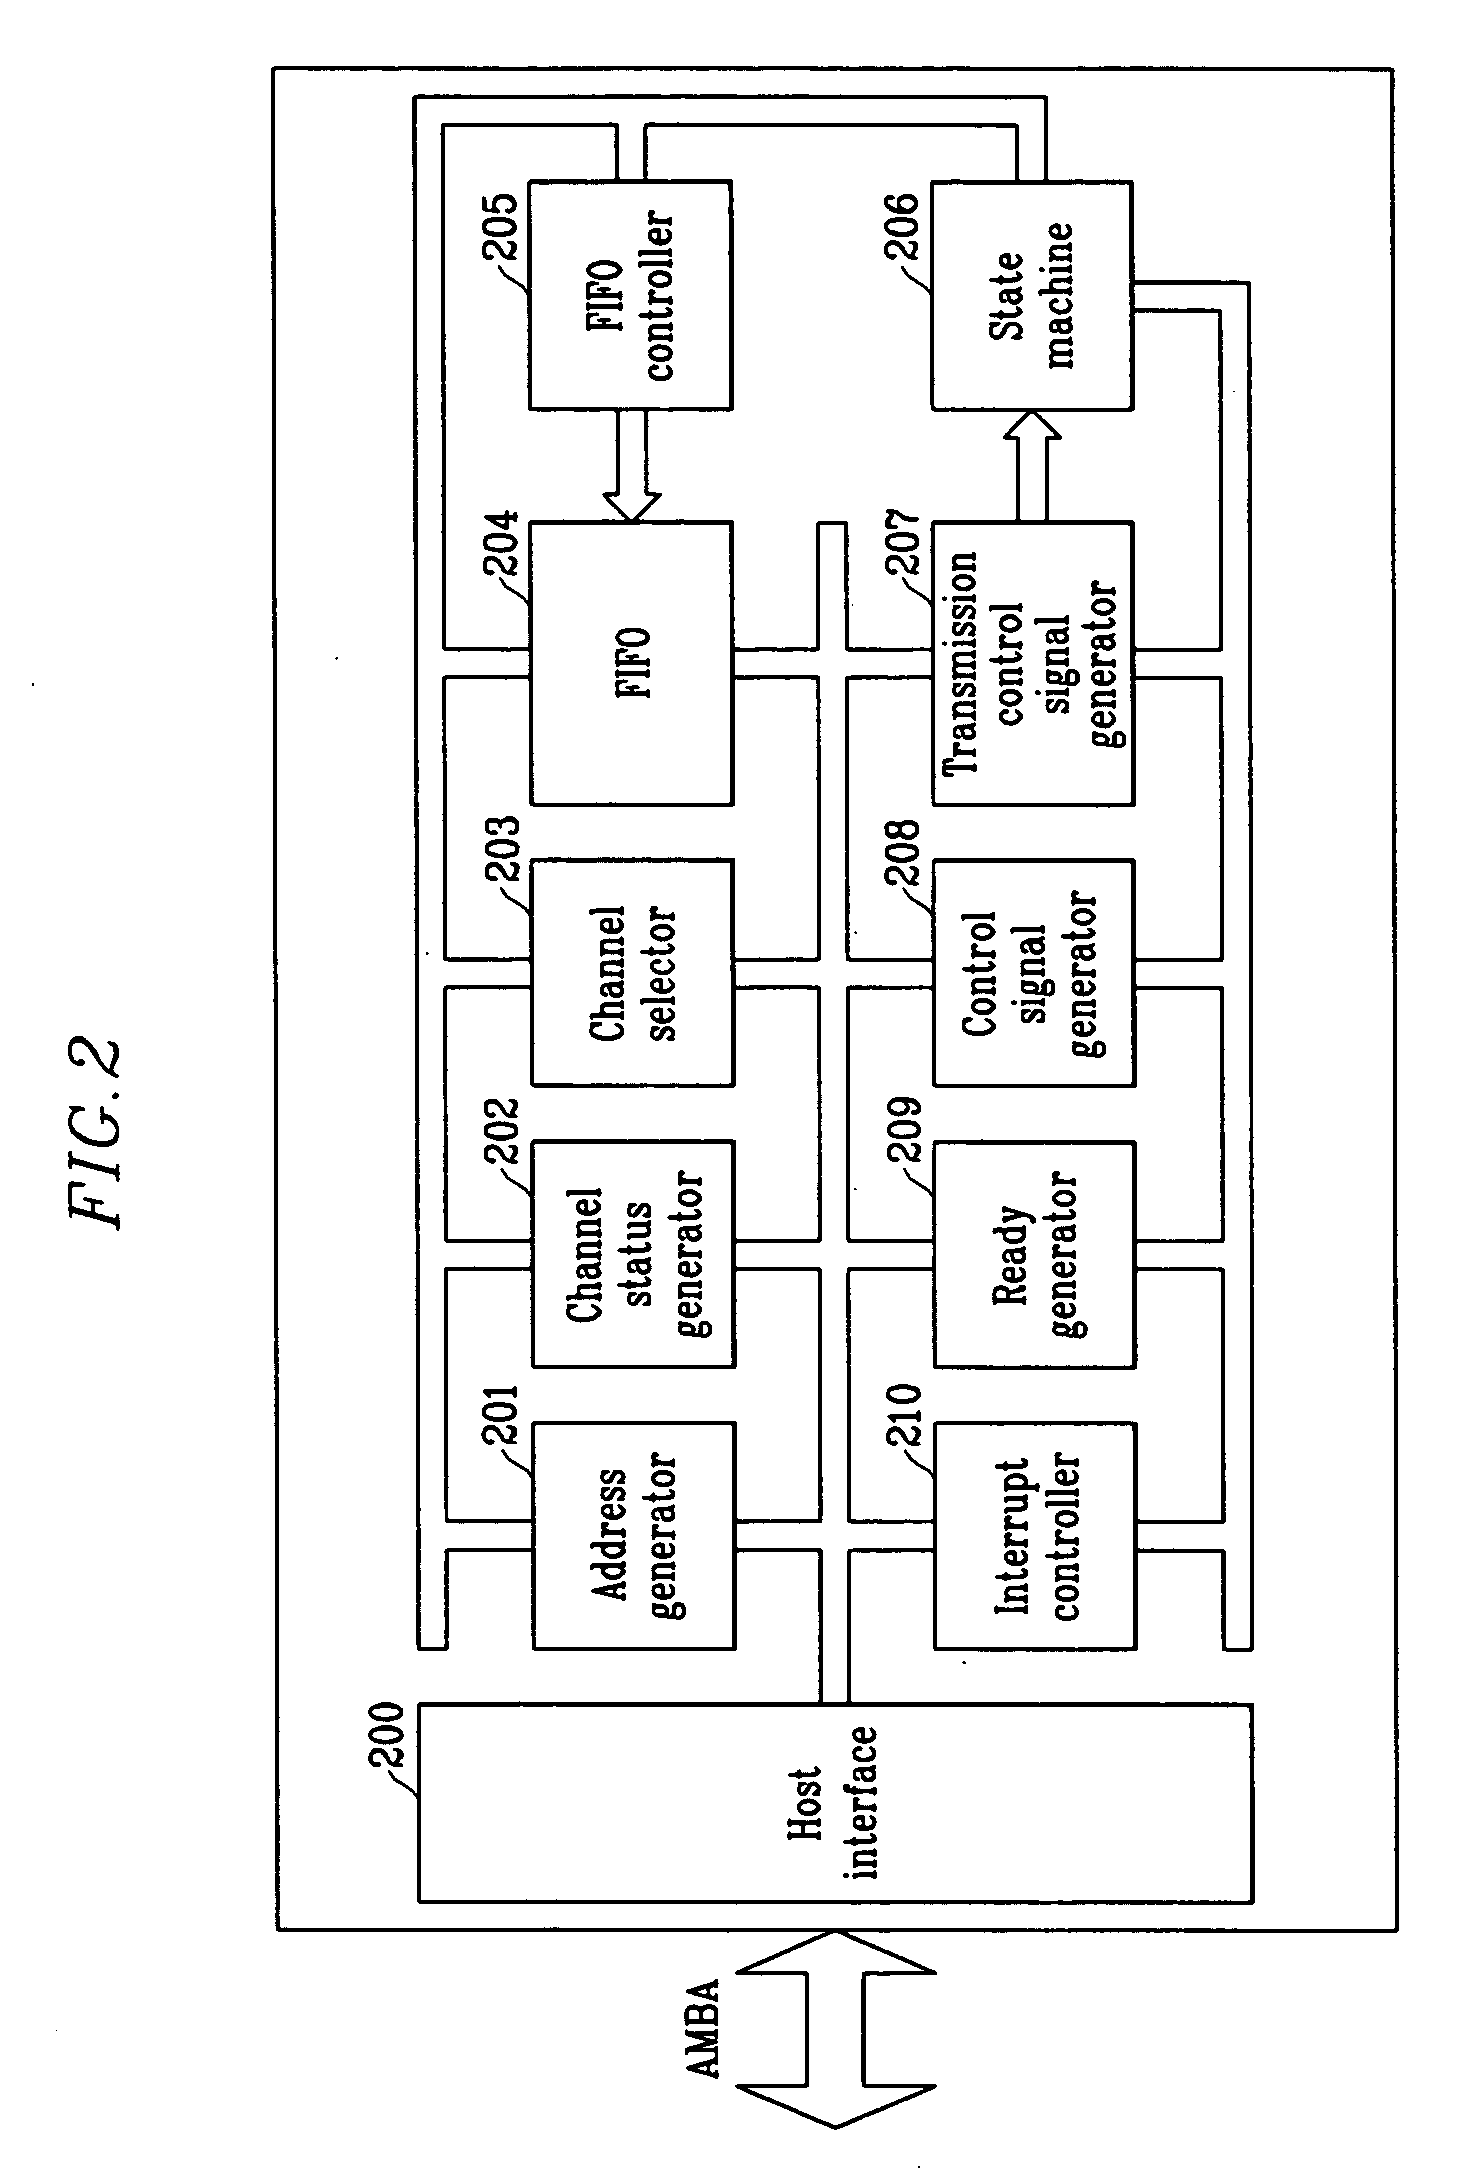 Direct memory access control device and method for automatically updating data transmisson size from peripheral